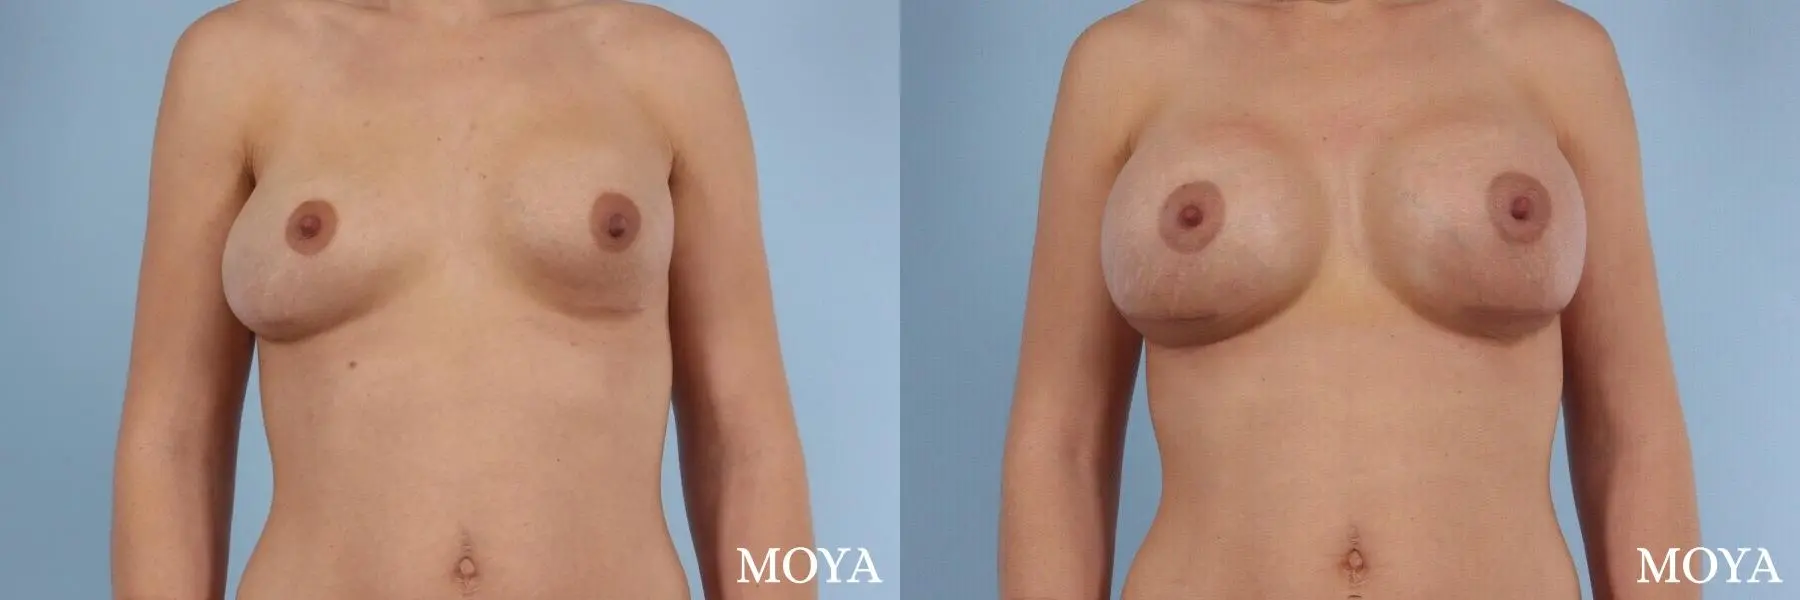 Breast Implant Exchange: Patient 1 - Before and After 1